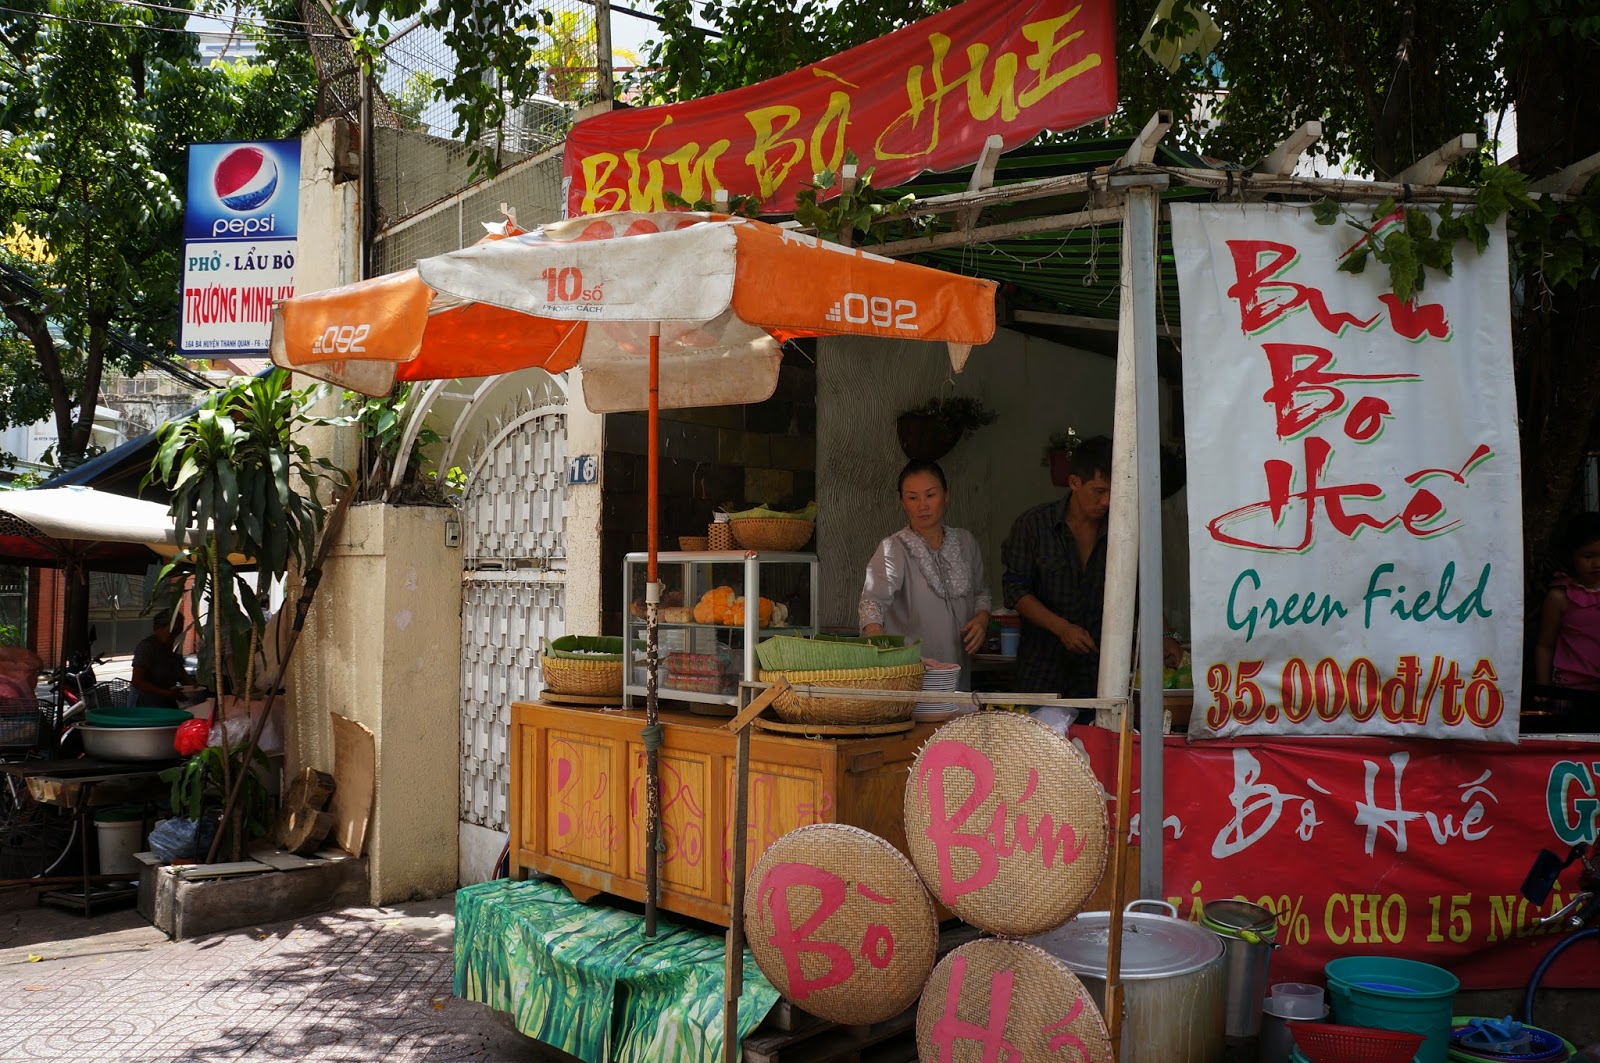 Spotted this shop selling Vietnamese delights while walking around in Ho Chi Minh City